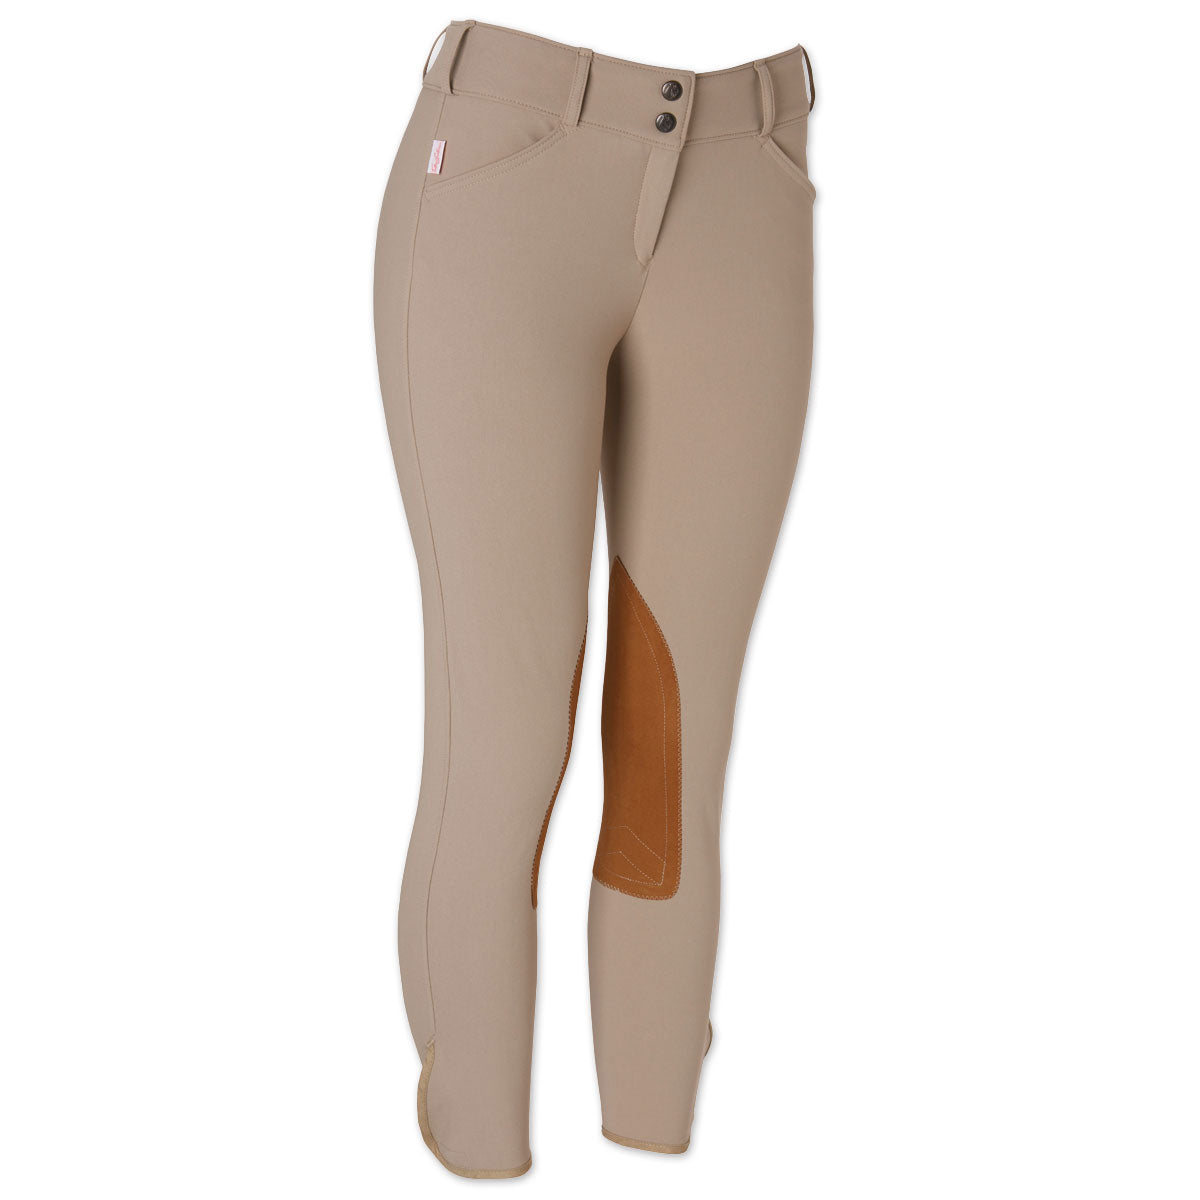 Tailored Sportsman Trophy Hunter Breeches - Mid-Rise Tan